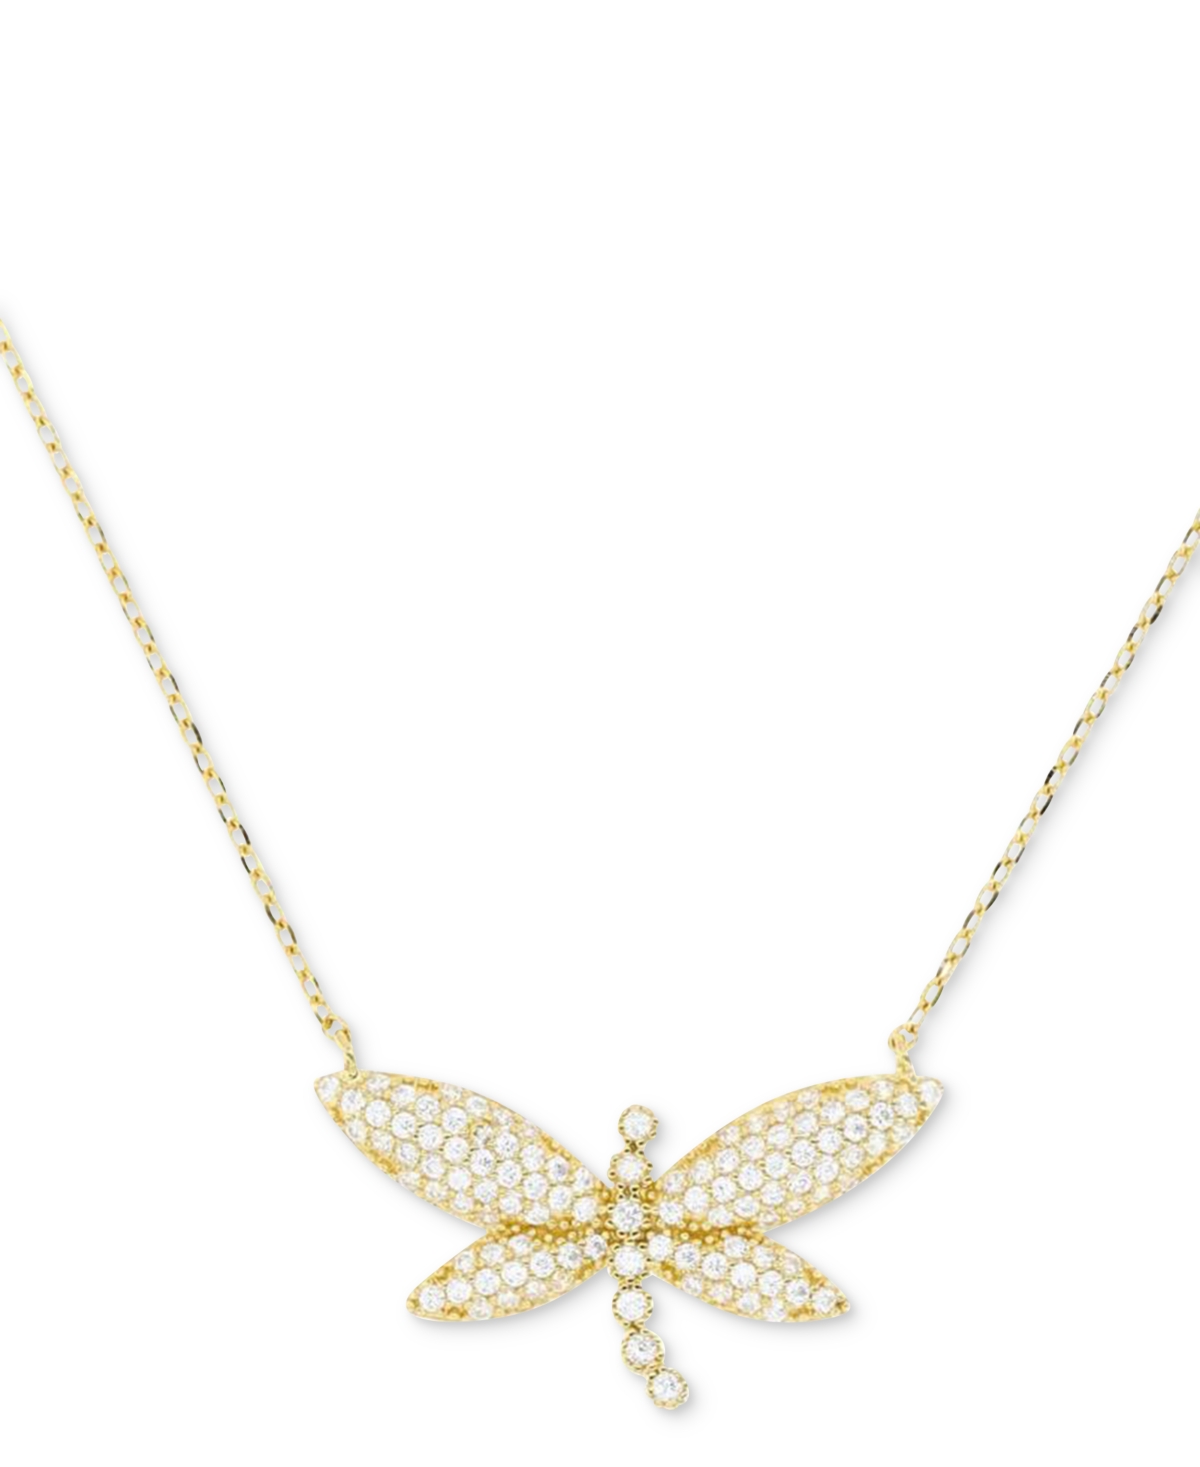 Cubic Zirconia Pave Dragonfly Pendant Necklace in 14k Gold-Plated Sterling Silver, 18" +2" extender - Gold